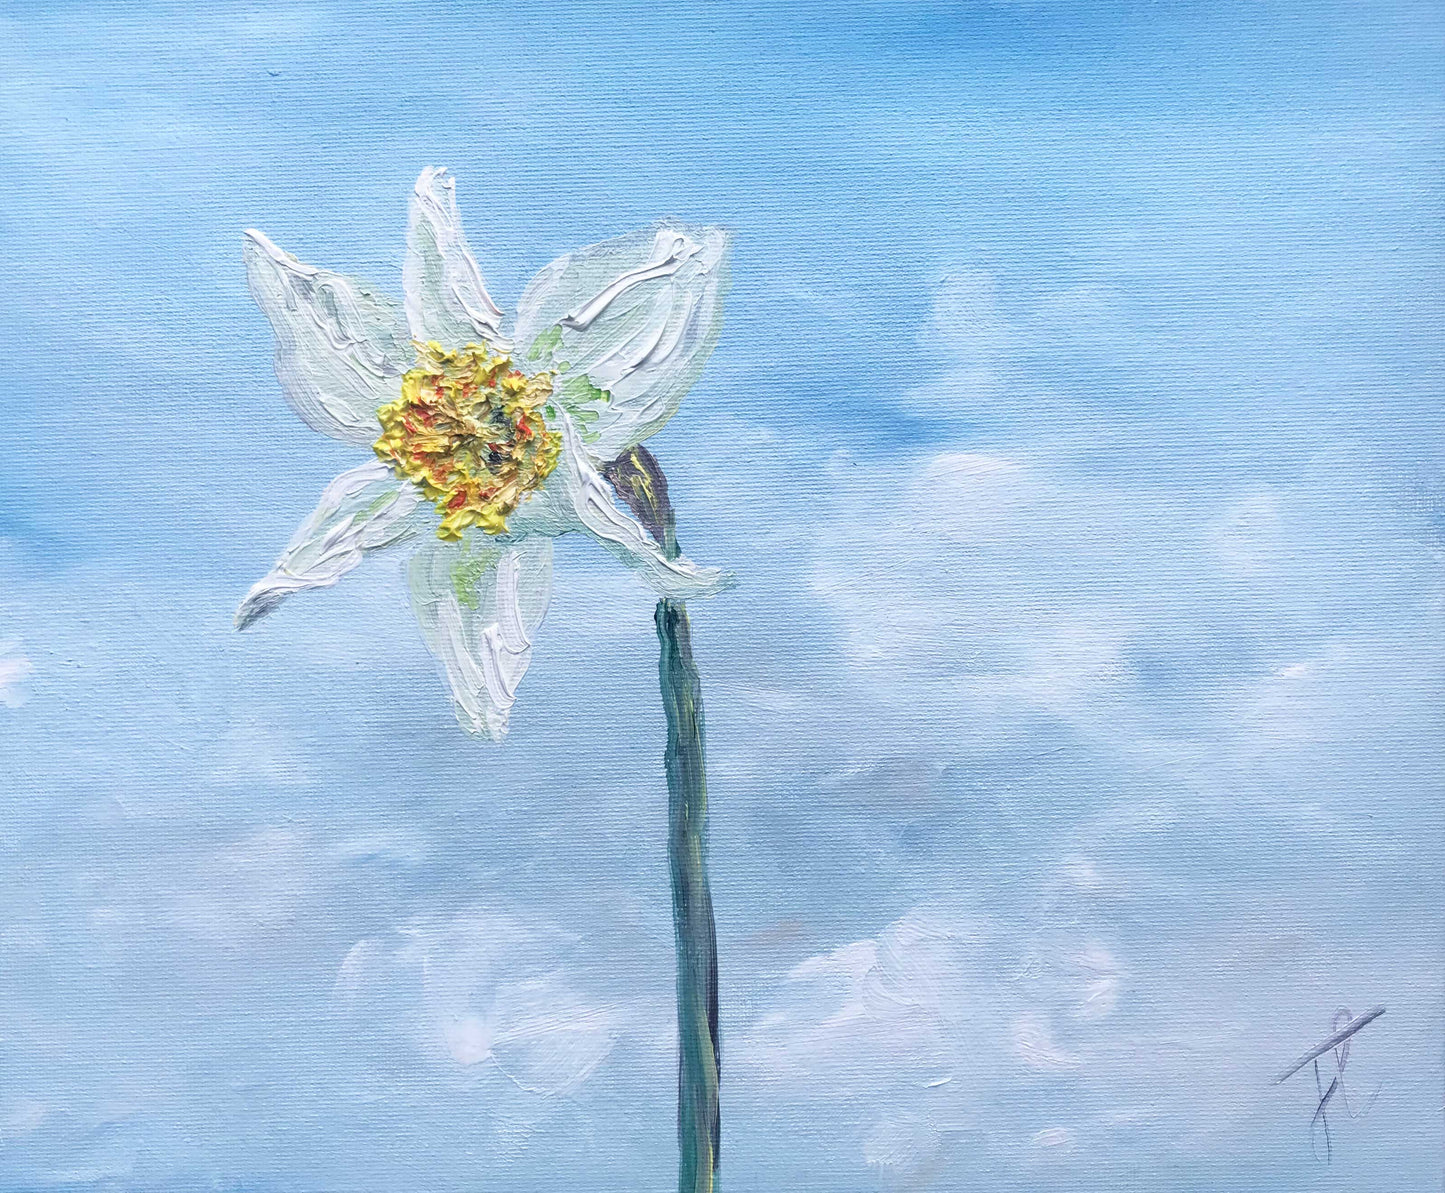 Painting of a single white daffodil with yellow centre, against a blue sky with soft white clouds. The paint comprising the daffodil's surface is textured.